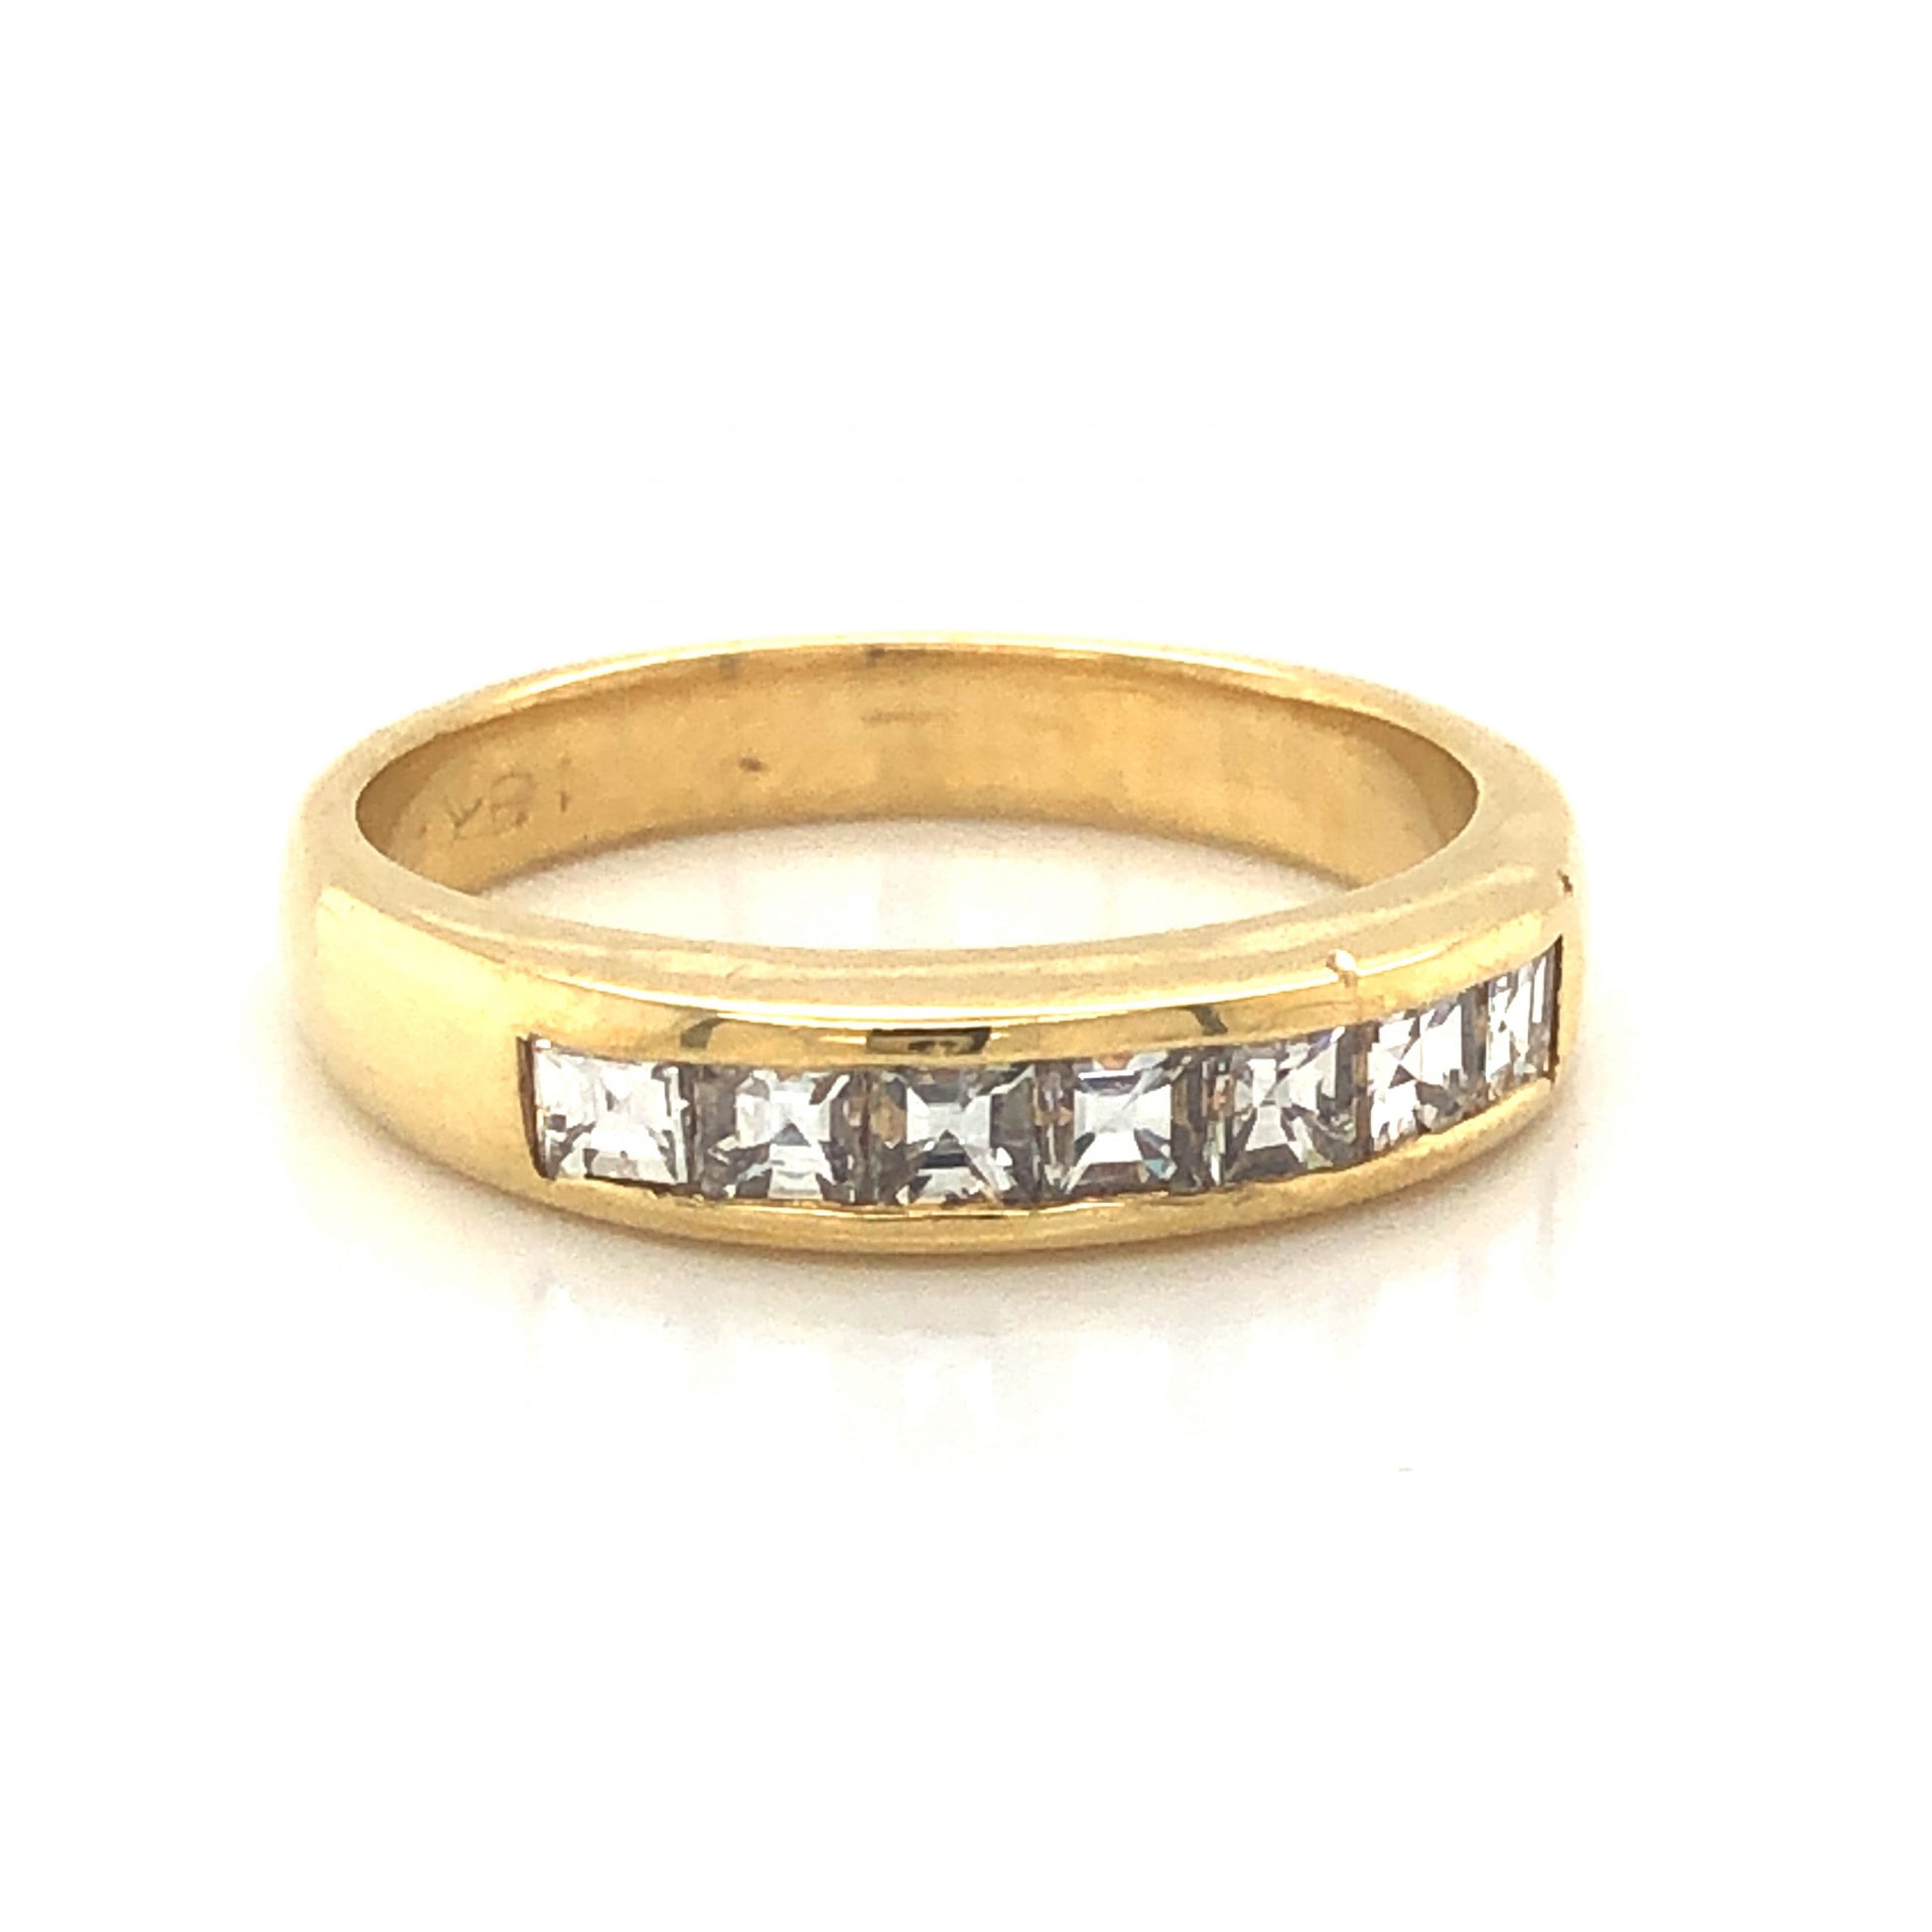 Square Step Cut Diamond Wedding Band in 18k Yellow GoldComposition: PlatinumRing Size: 5.5Total Diamond Weight: .63 ctTotal Gram Weight: 4.0 gInscription: 18k 